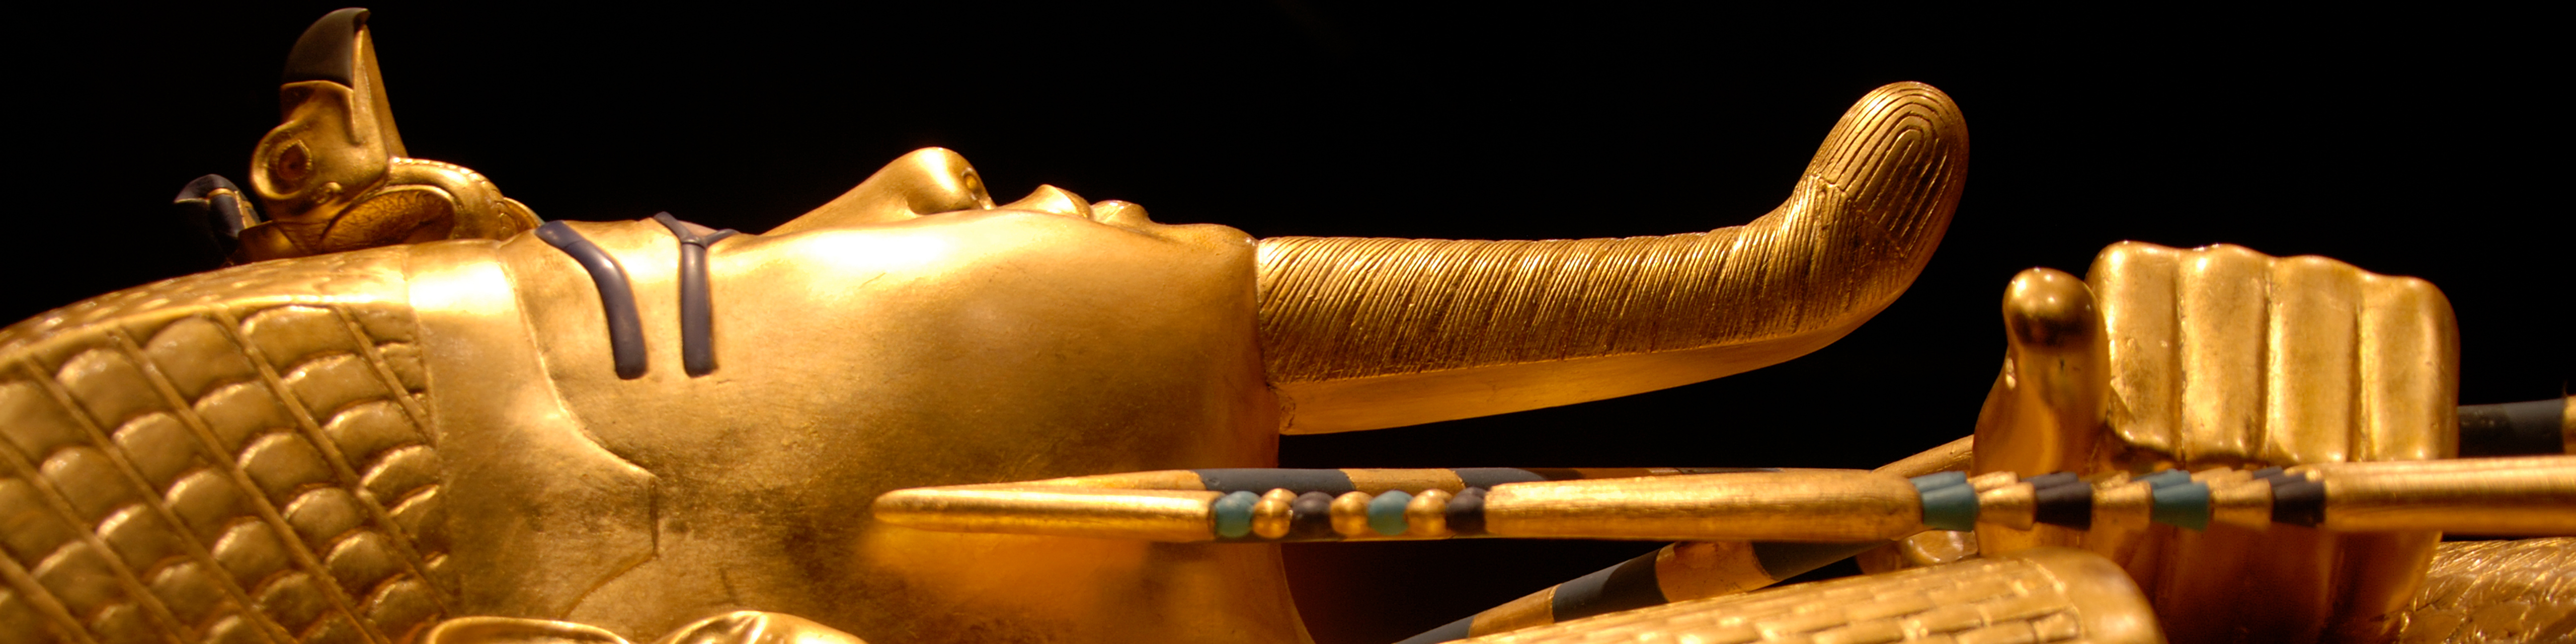 Side view of King Tut's golden tomb in Egypt